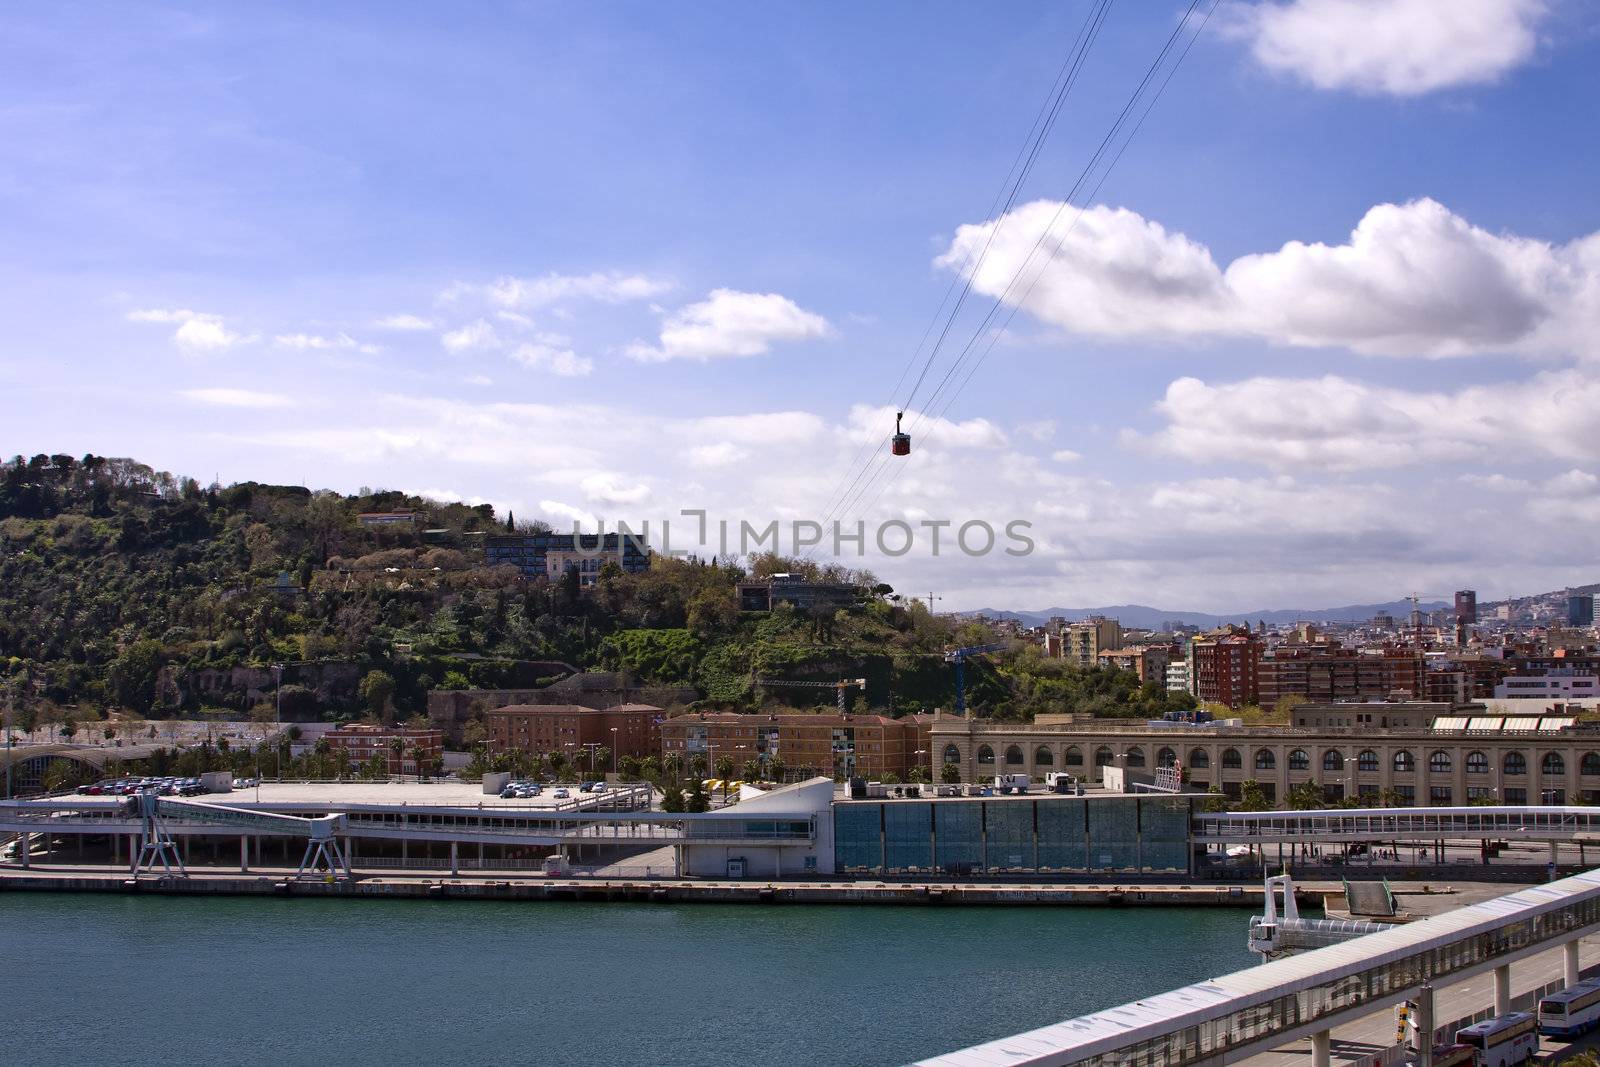 Montjuic cable car by trevorb